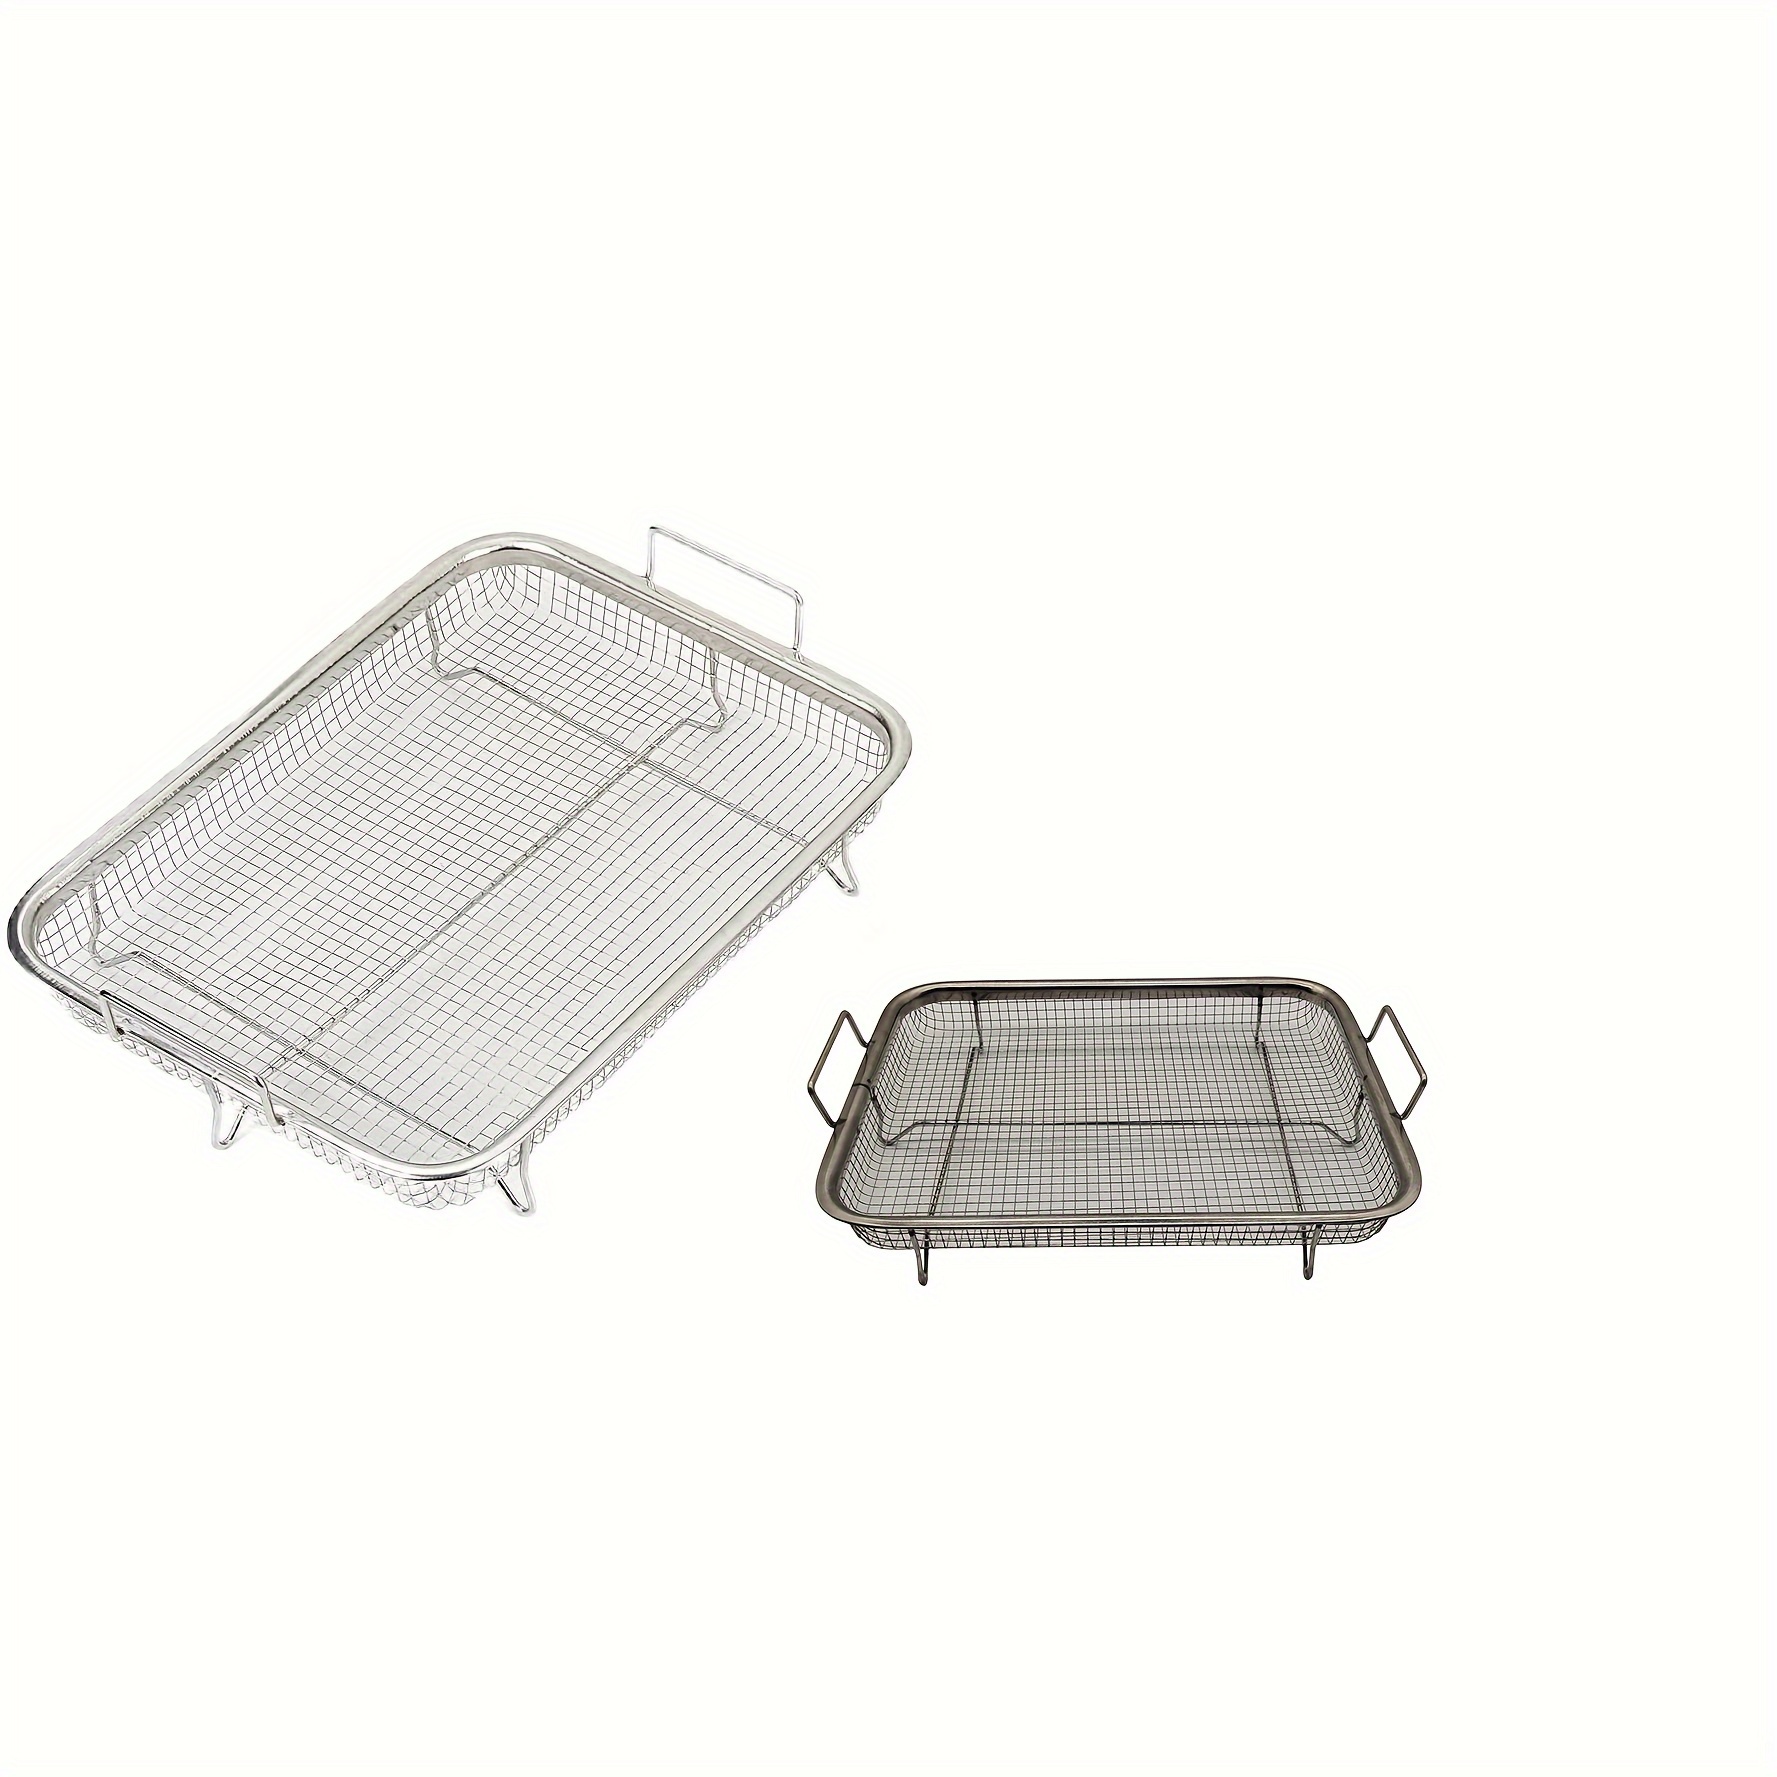 

Grill Basket, Vegetable Barbecue Basket, Stainless Steel Square Wire Mesh Grilling Basket Roasting Pan With 2 Handles For Restaurant Use